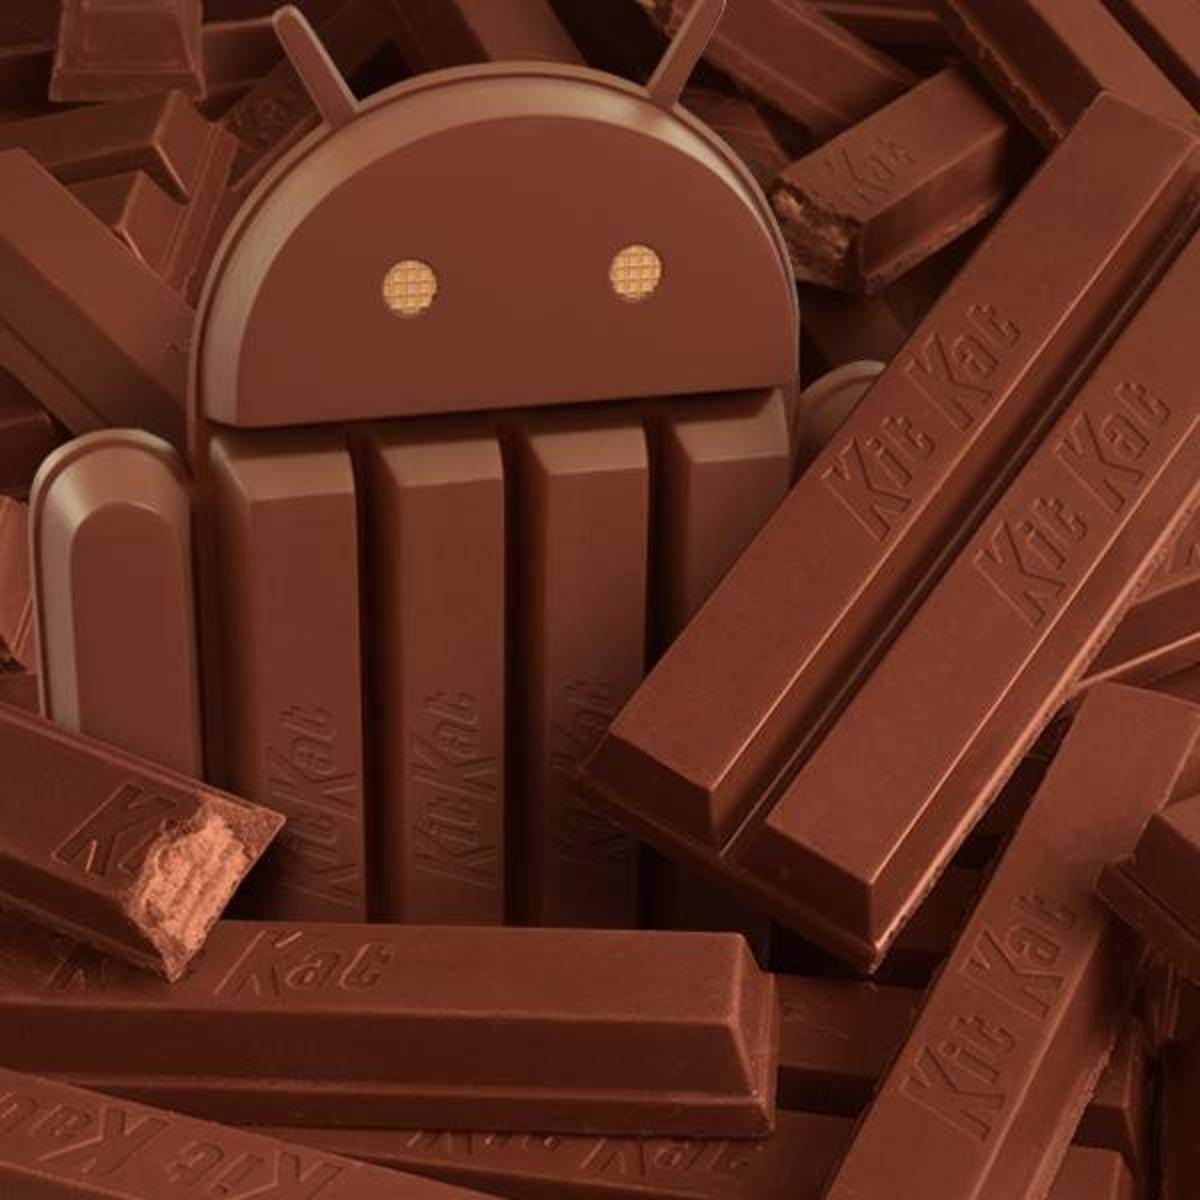 Android Kit Kat Background